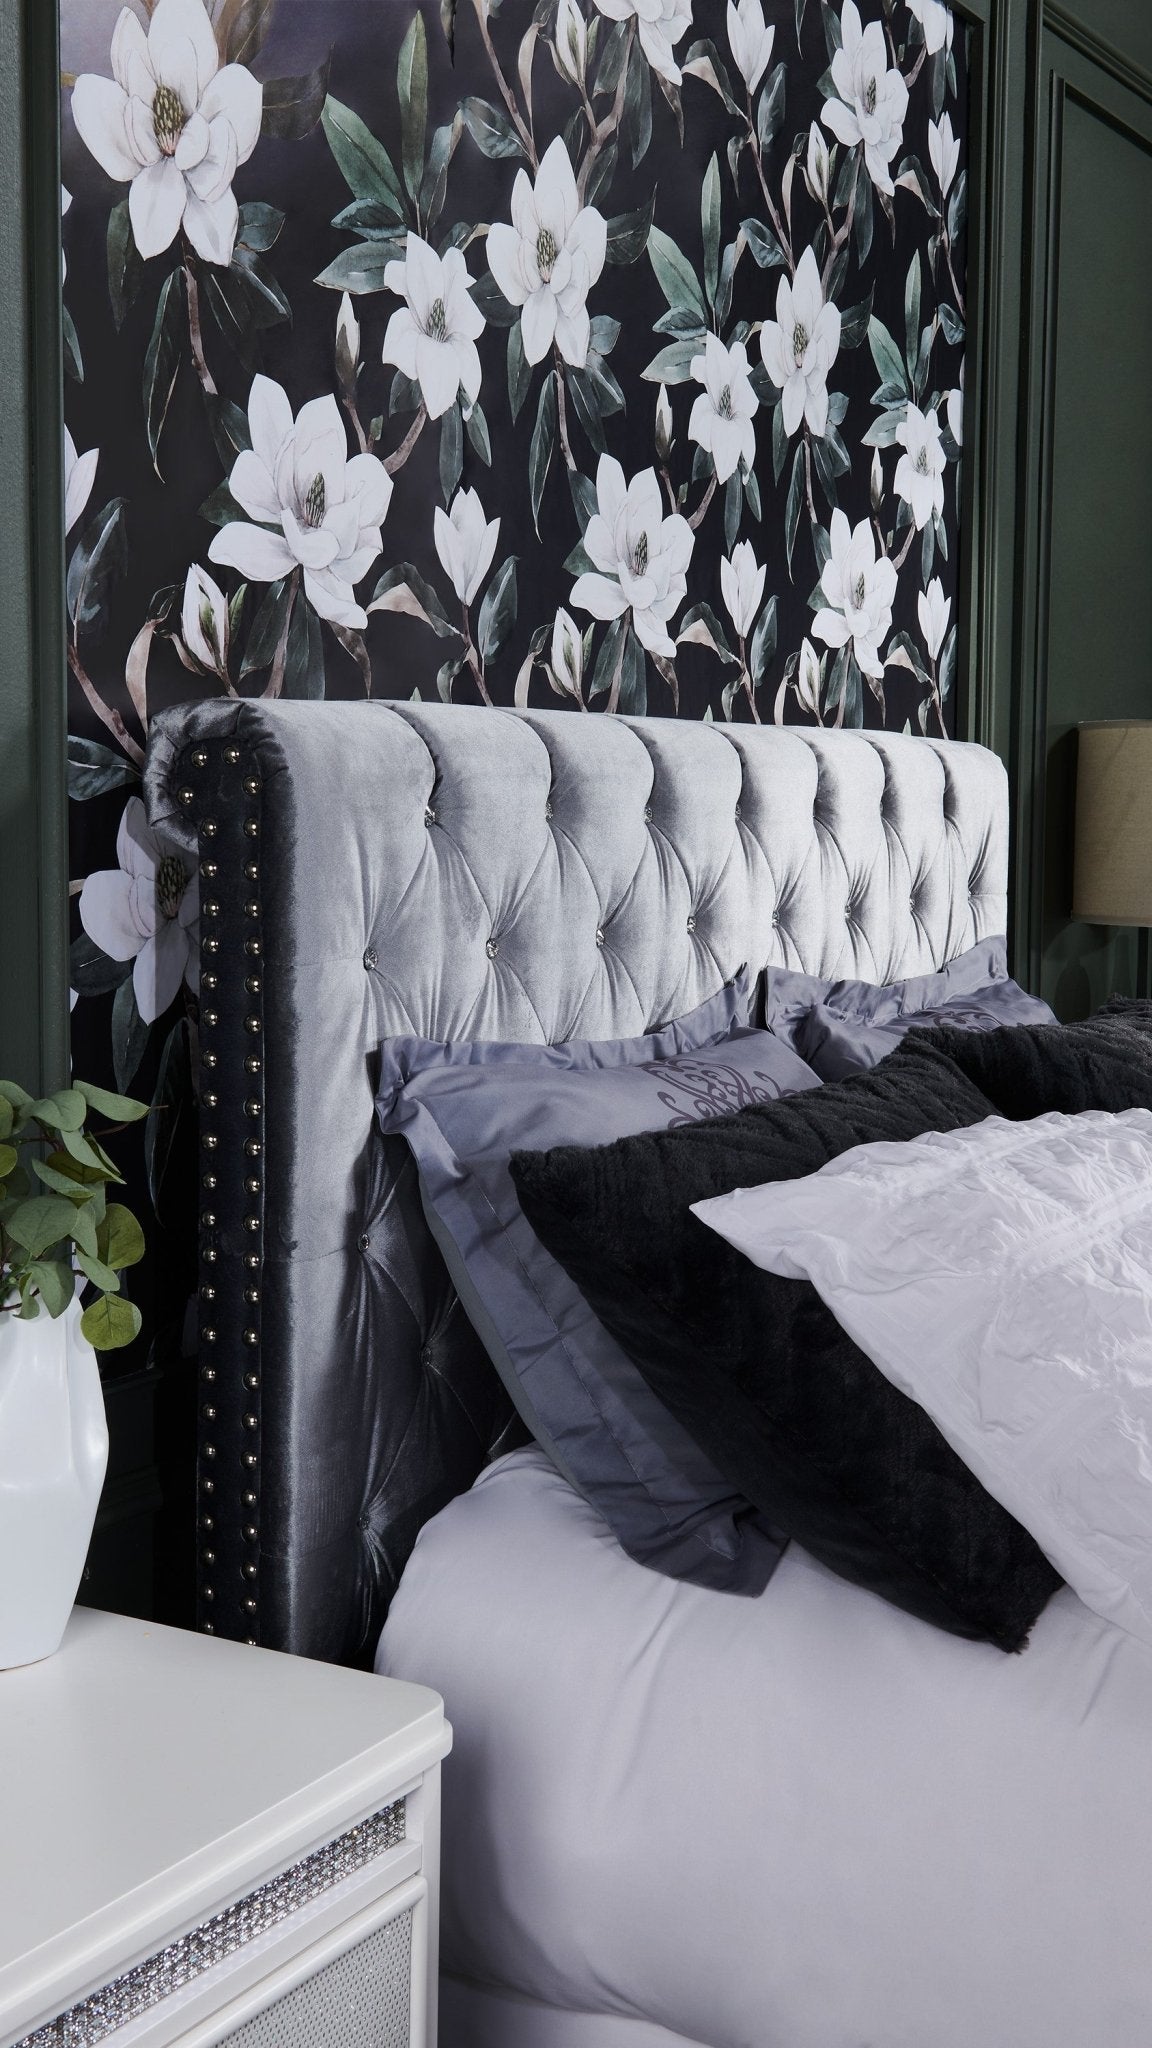 A close-up of a bedroom showing a wallpaper with white magnolias on a black background, matching the gray tufted headboard with black accents.